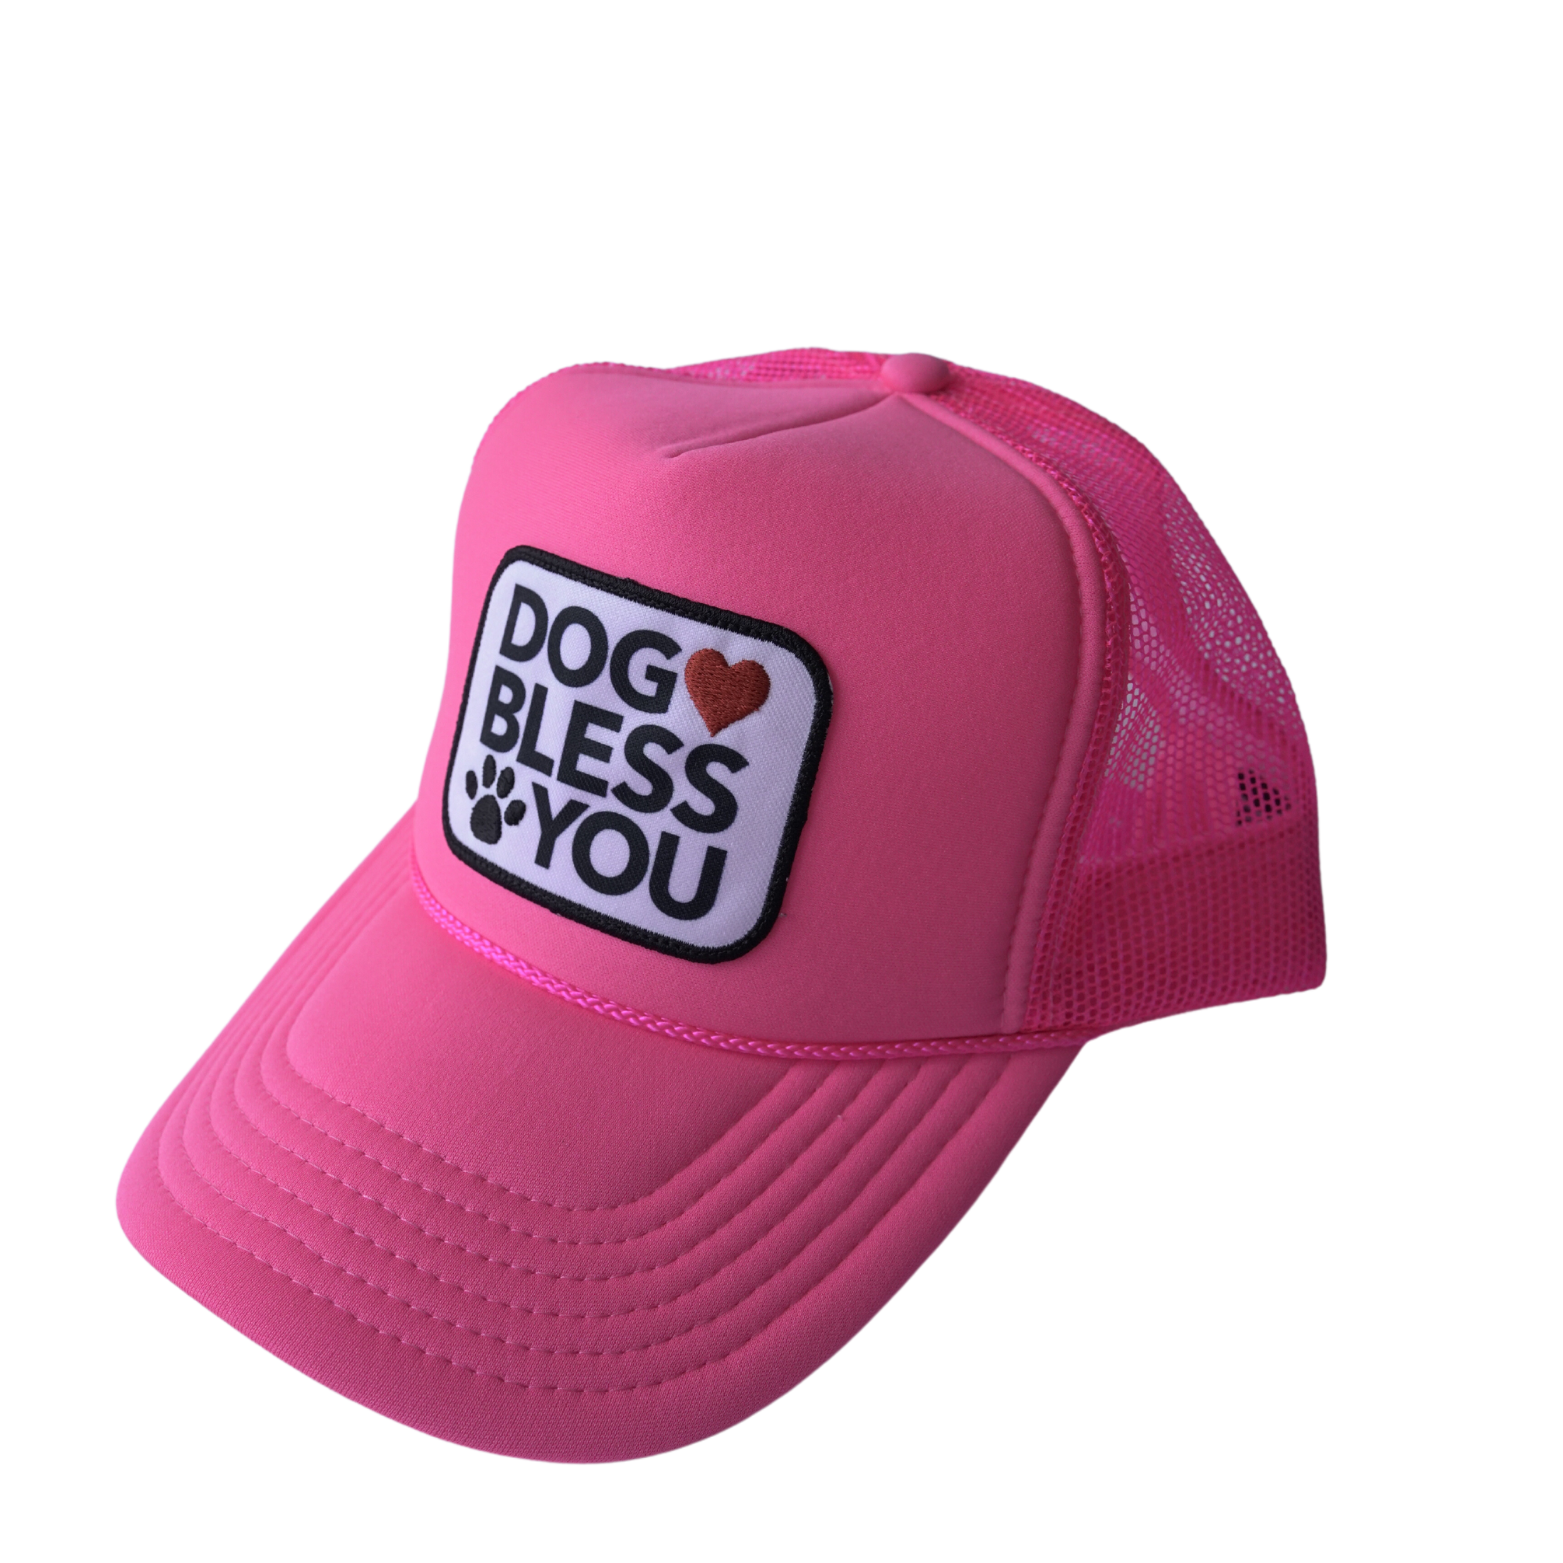 Hot Pink Dog Bless You Trucker Hat